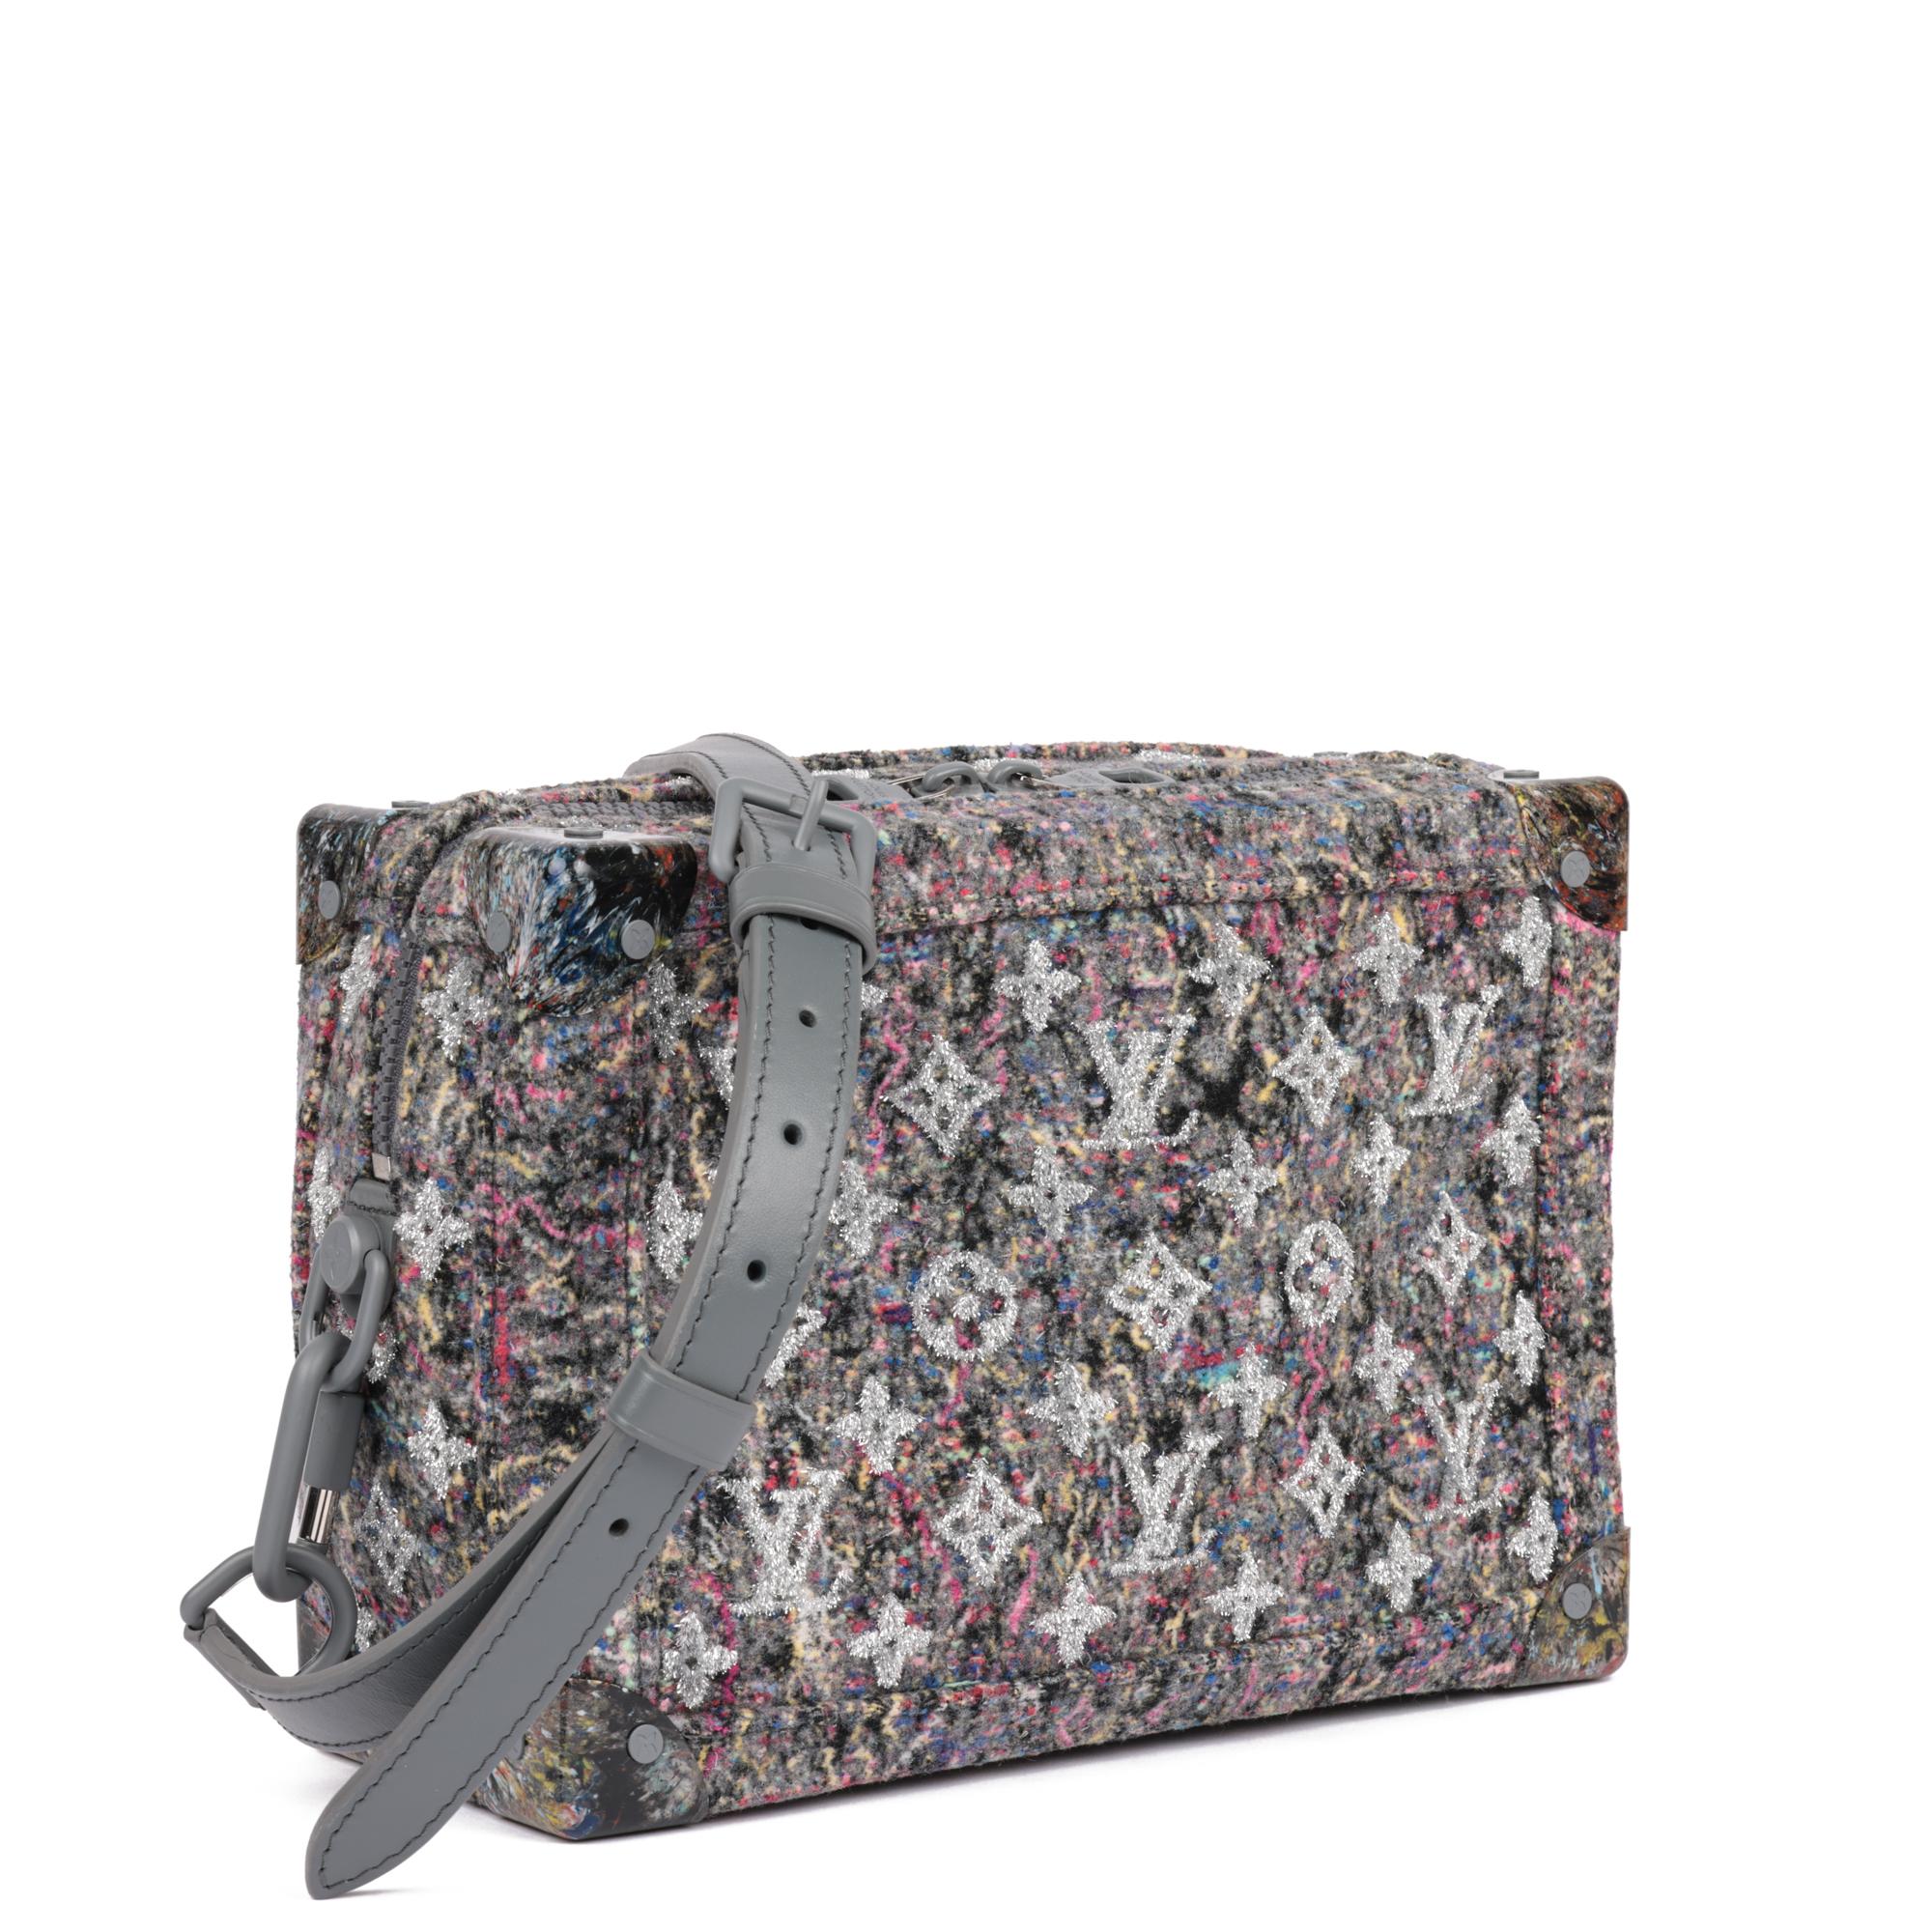 LOUIS VUITTON
x Virgil Abloh Multicolour Recycled Felt & Silver Lurex Monogram Sustainable Line Soft Trunk

Xupes Reference: HB5142
Age (Circa): 2021
Accompanied By: Louis Vuitton Dust Bag
Authenticity Details: Microchip (Made in France)
Gender: